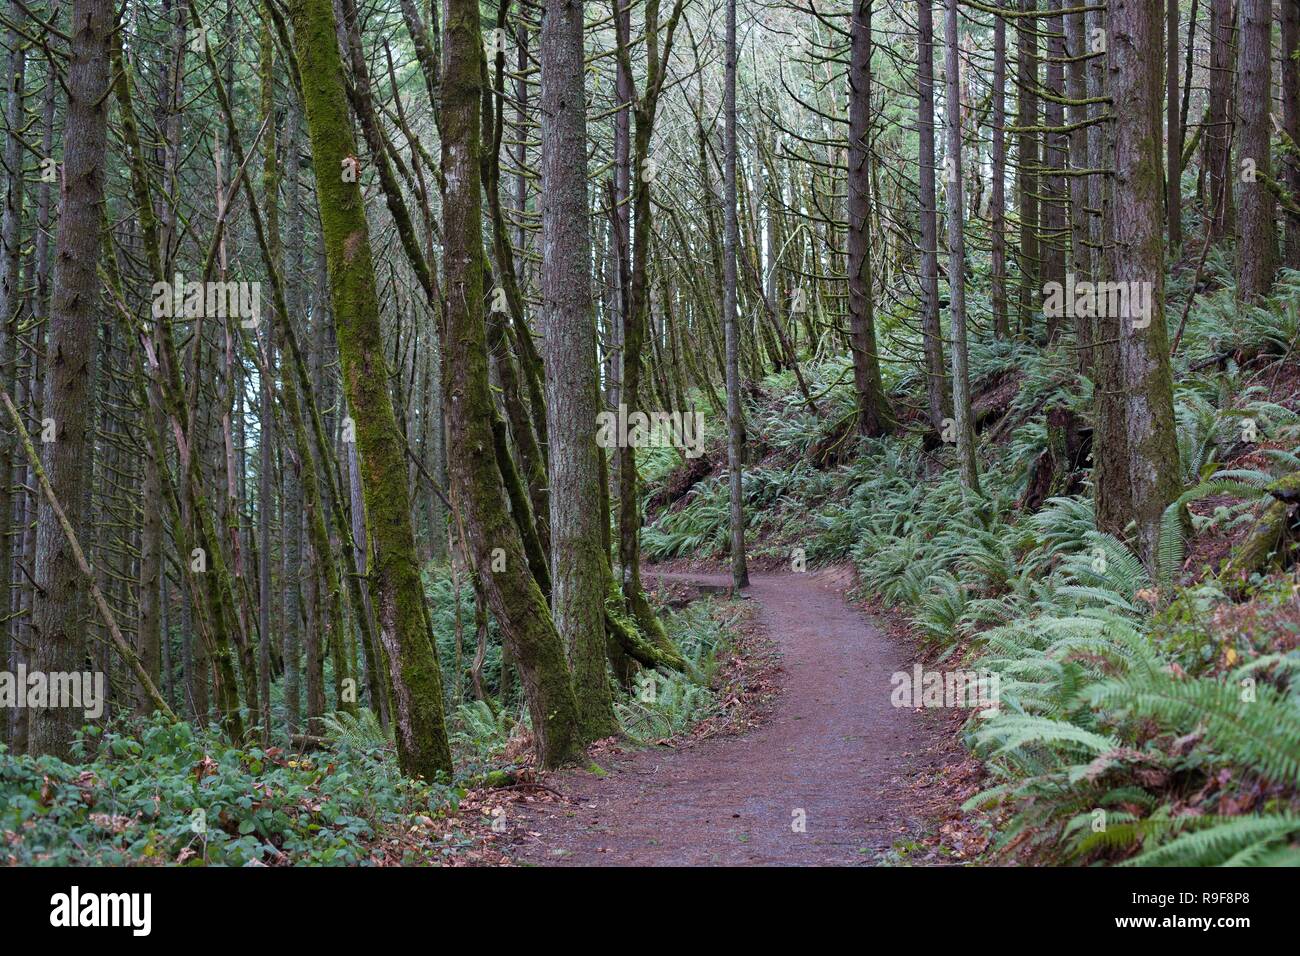 A section of the Ridgeline Trail system in Eugene, OR, USA. Stock Photo